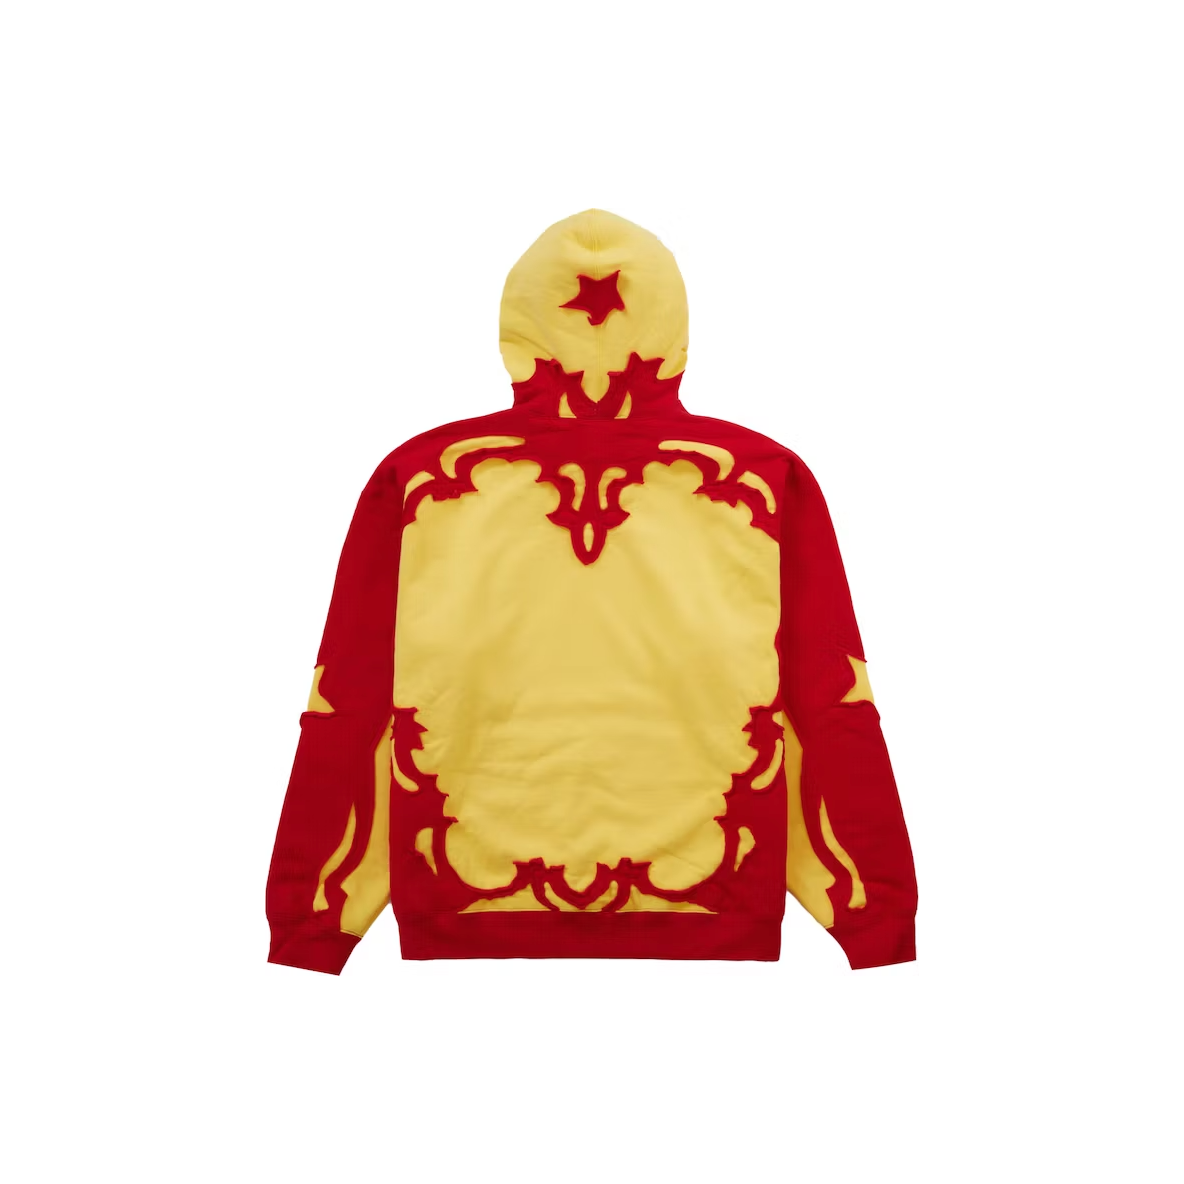 Supreme Western Cut Out Hooded Sweatshirt Gold